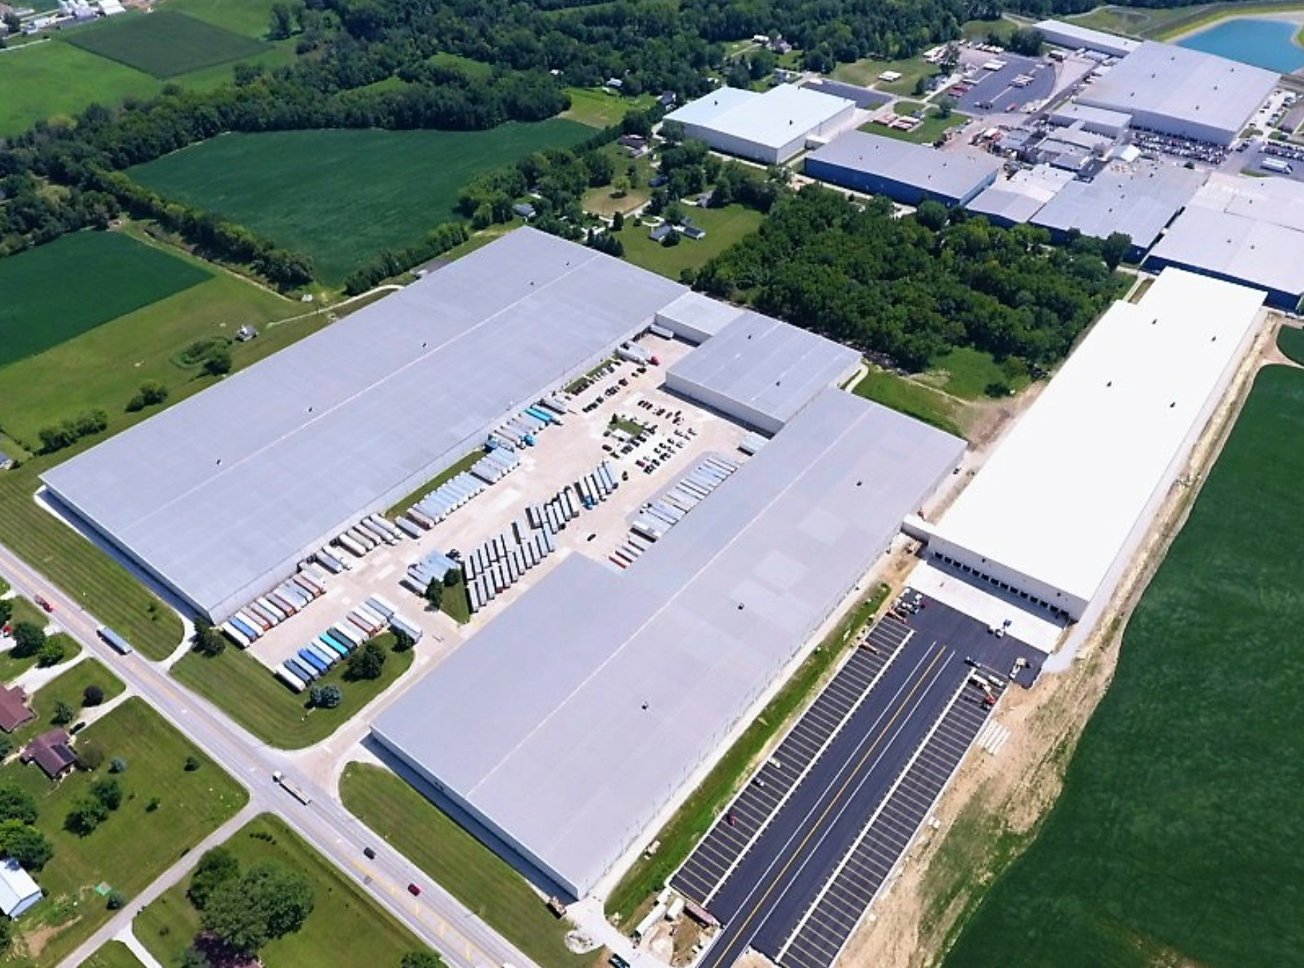  Red Gold’s warehousing is adjacent to its manufacturing facility to speed efficient distribution.